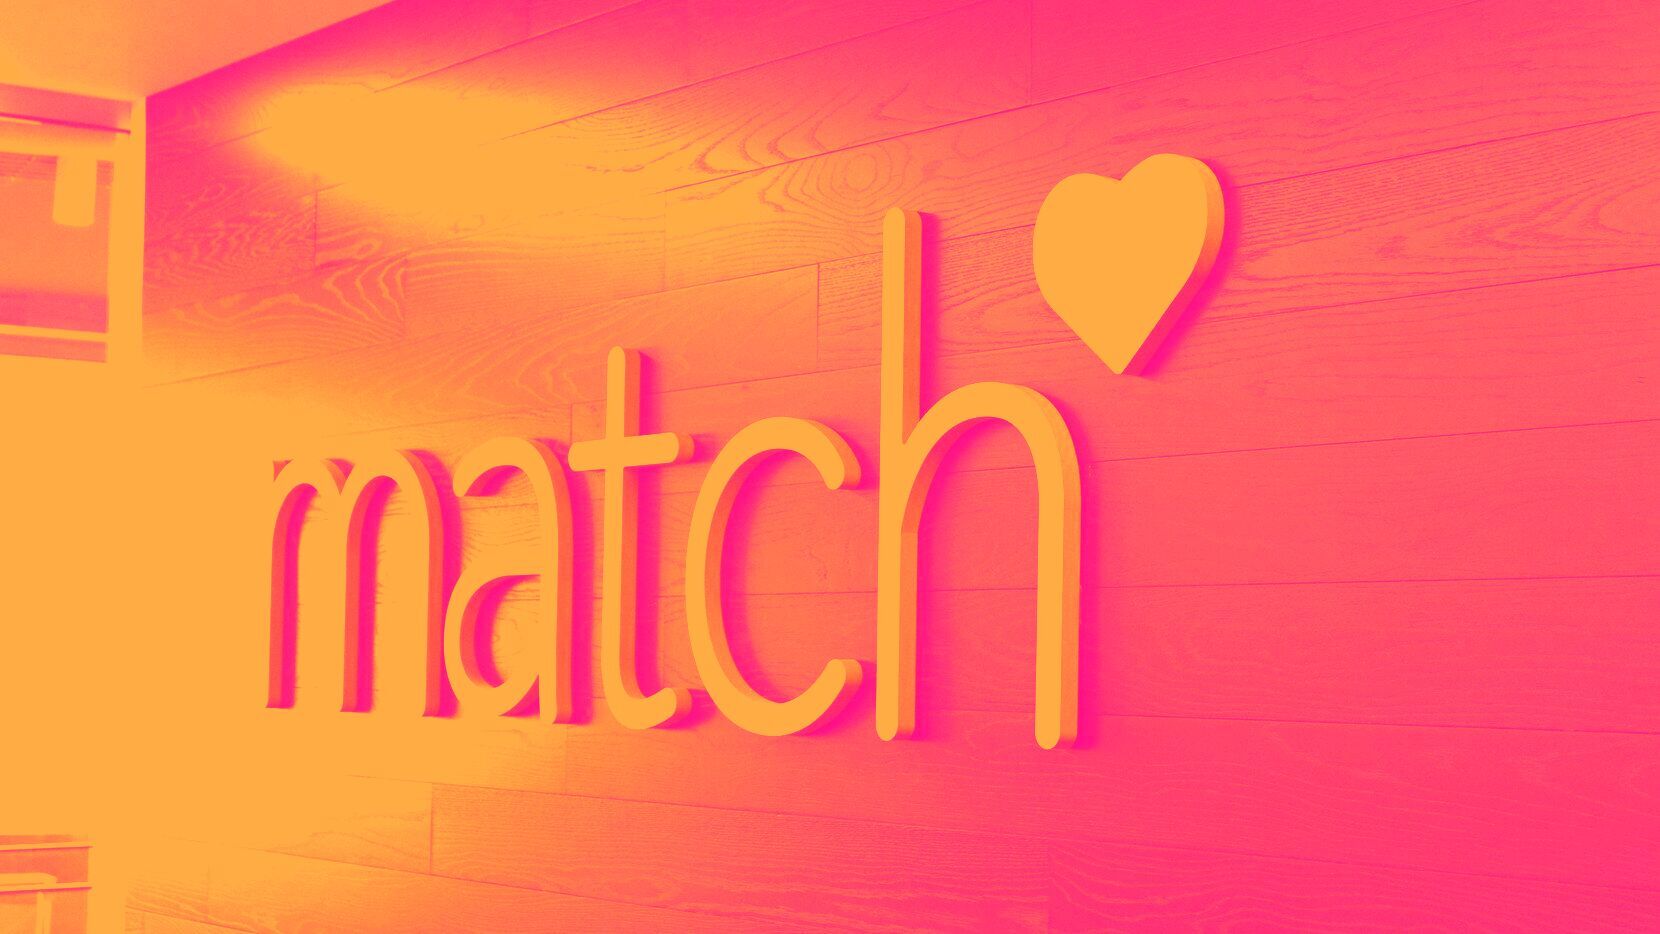 Match group cover image c044c5719a0f